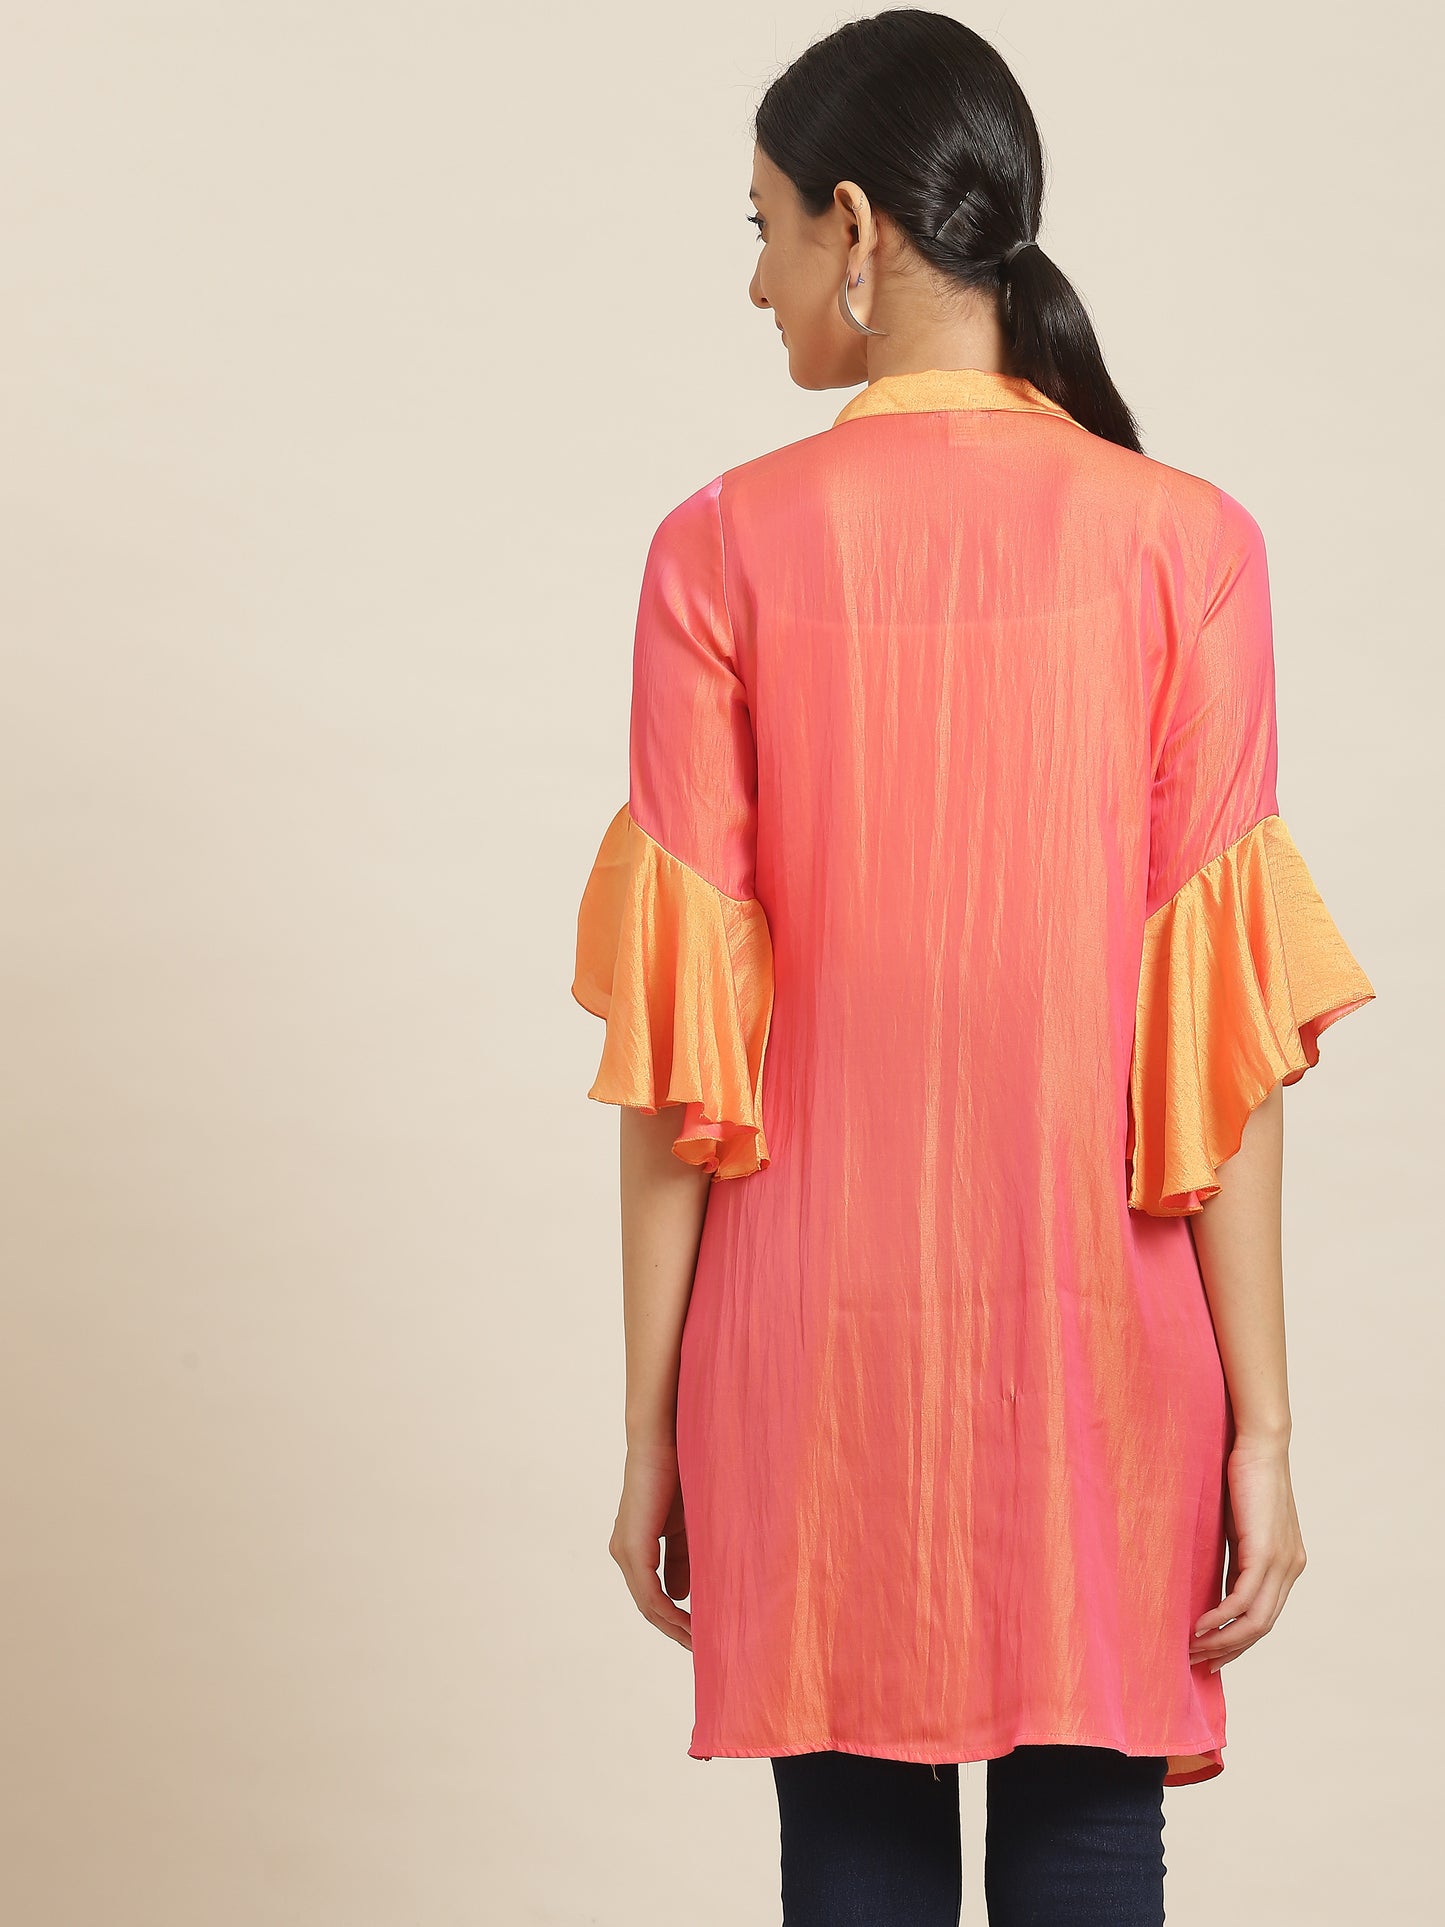 Solid Bright Orange Relaxed Fit  Three Quarter Bell Sleeve Silk Shrug